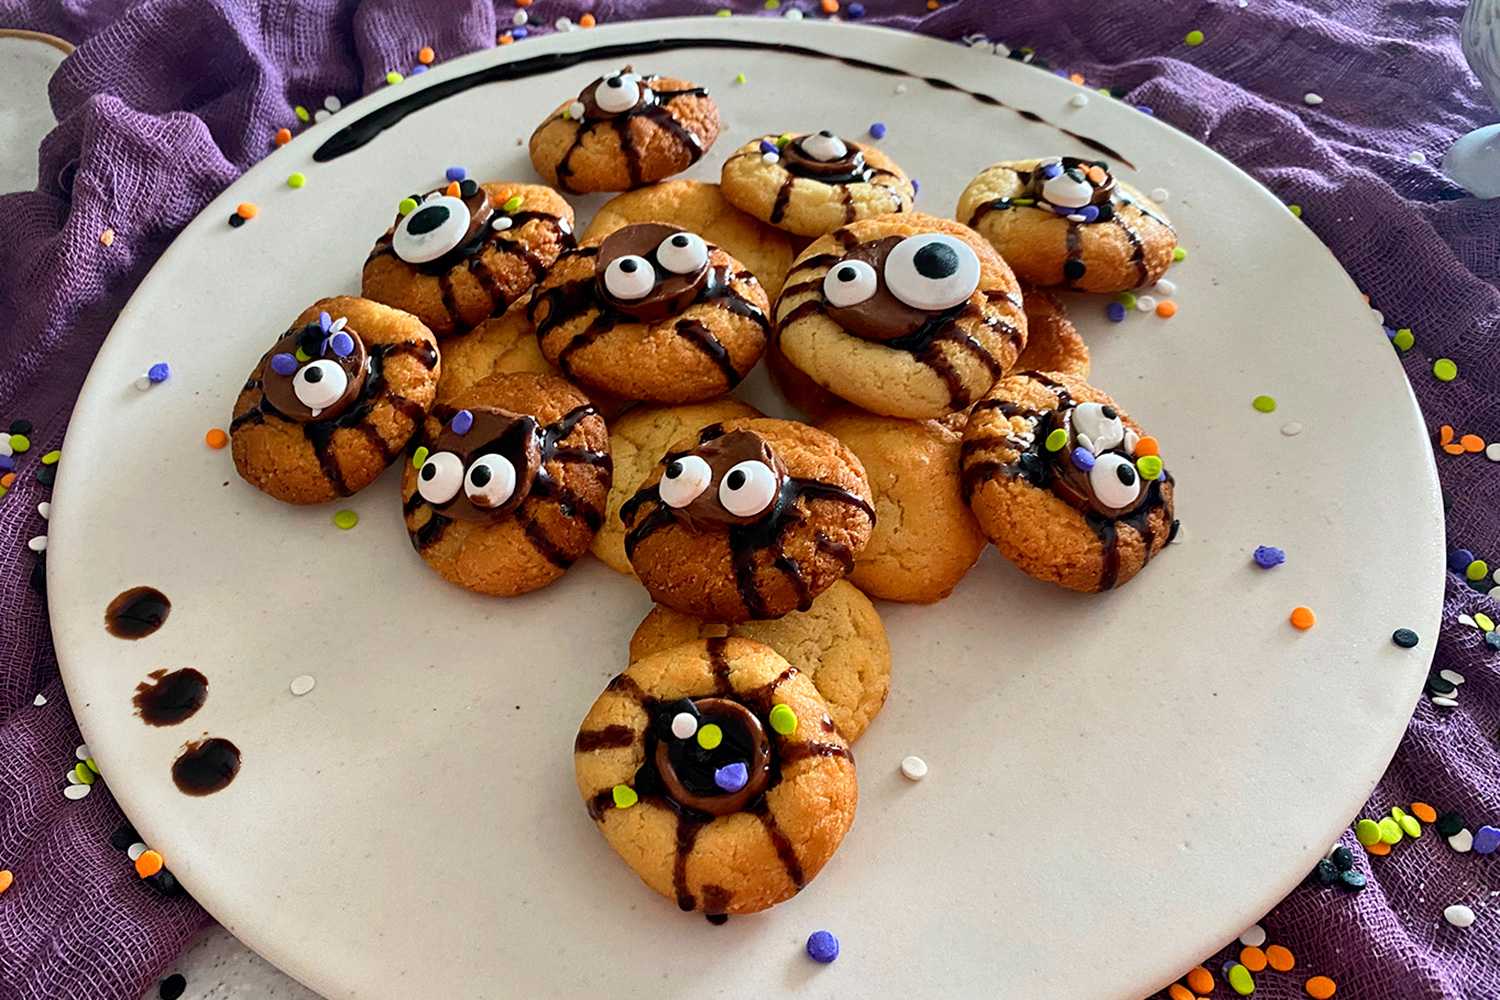 Sugar cookies decorated with chocolate syrup , sprinkles and scary eyes